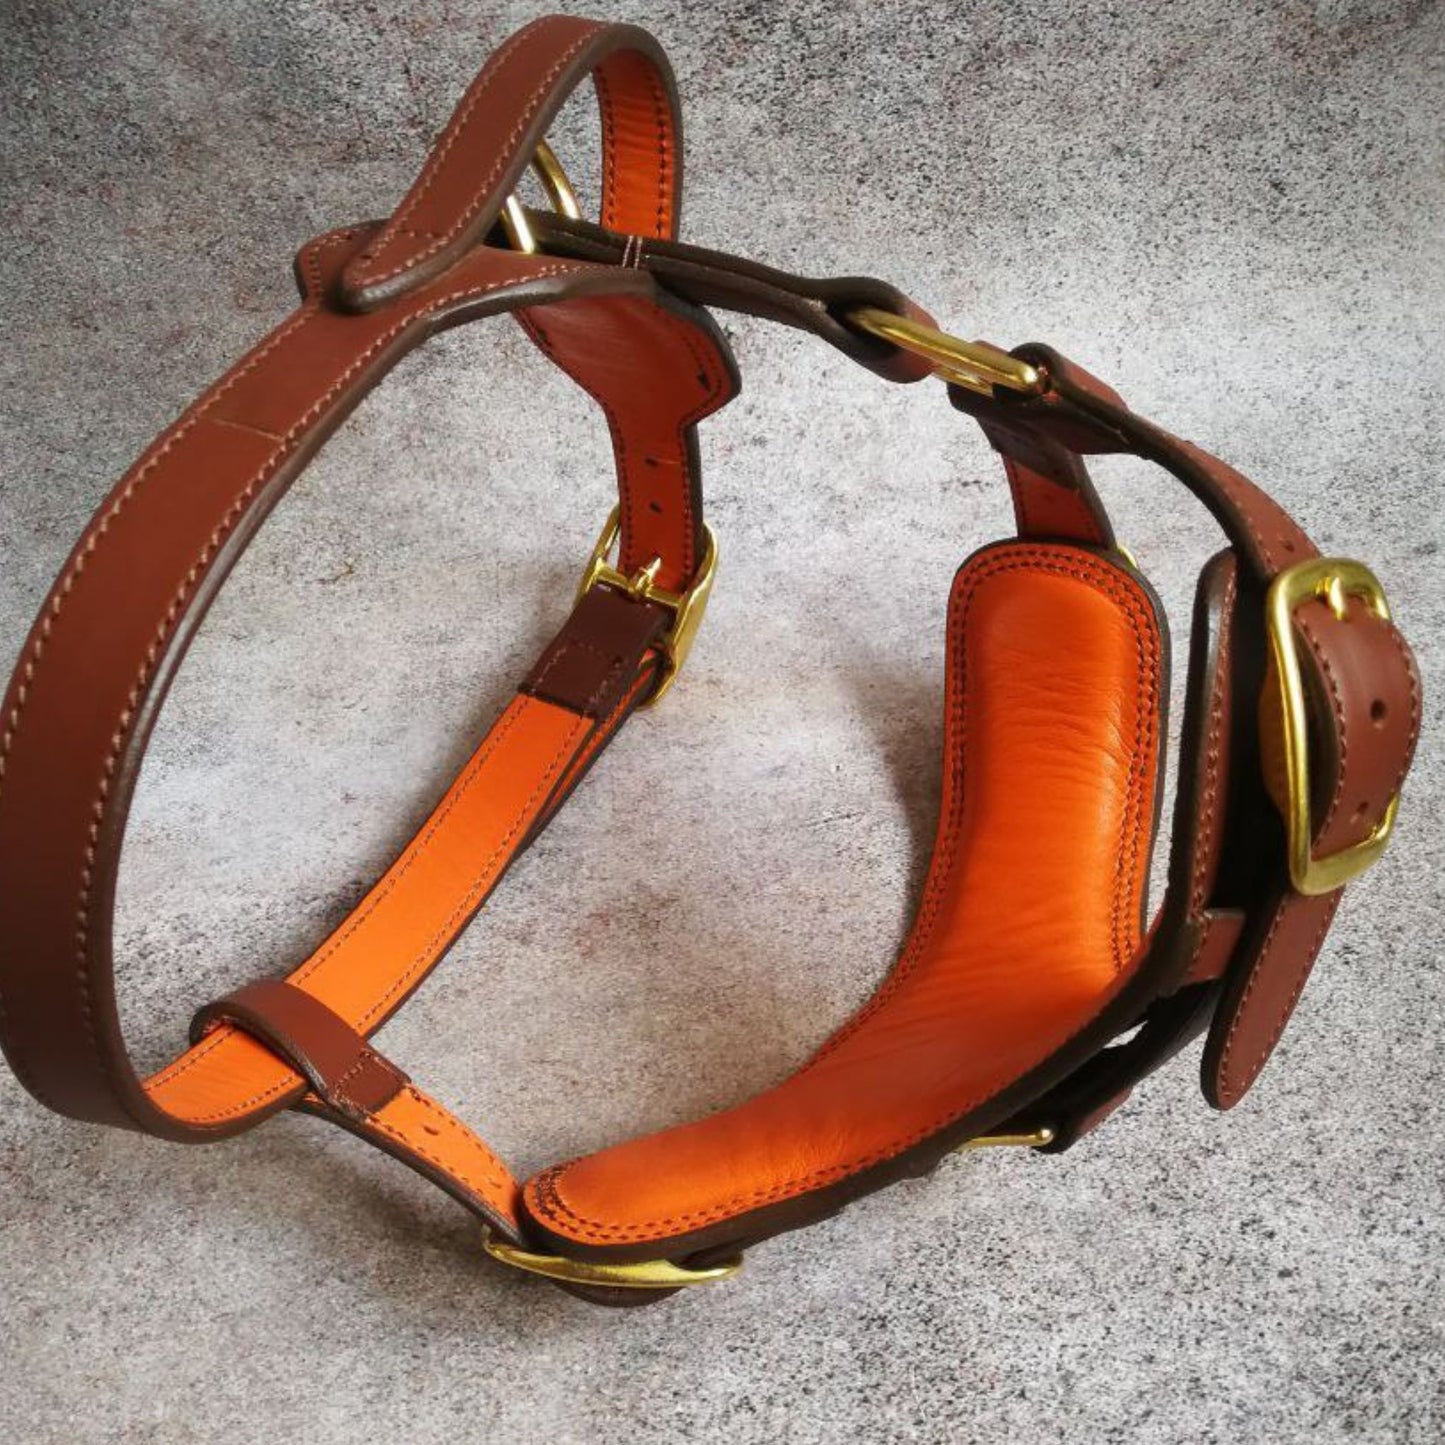 Leather Dog Harness and Leash + Nameplate Collar